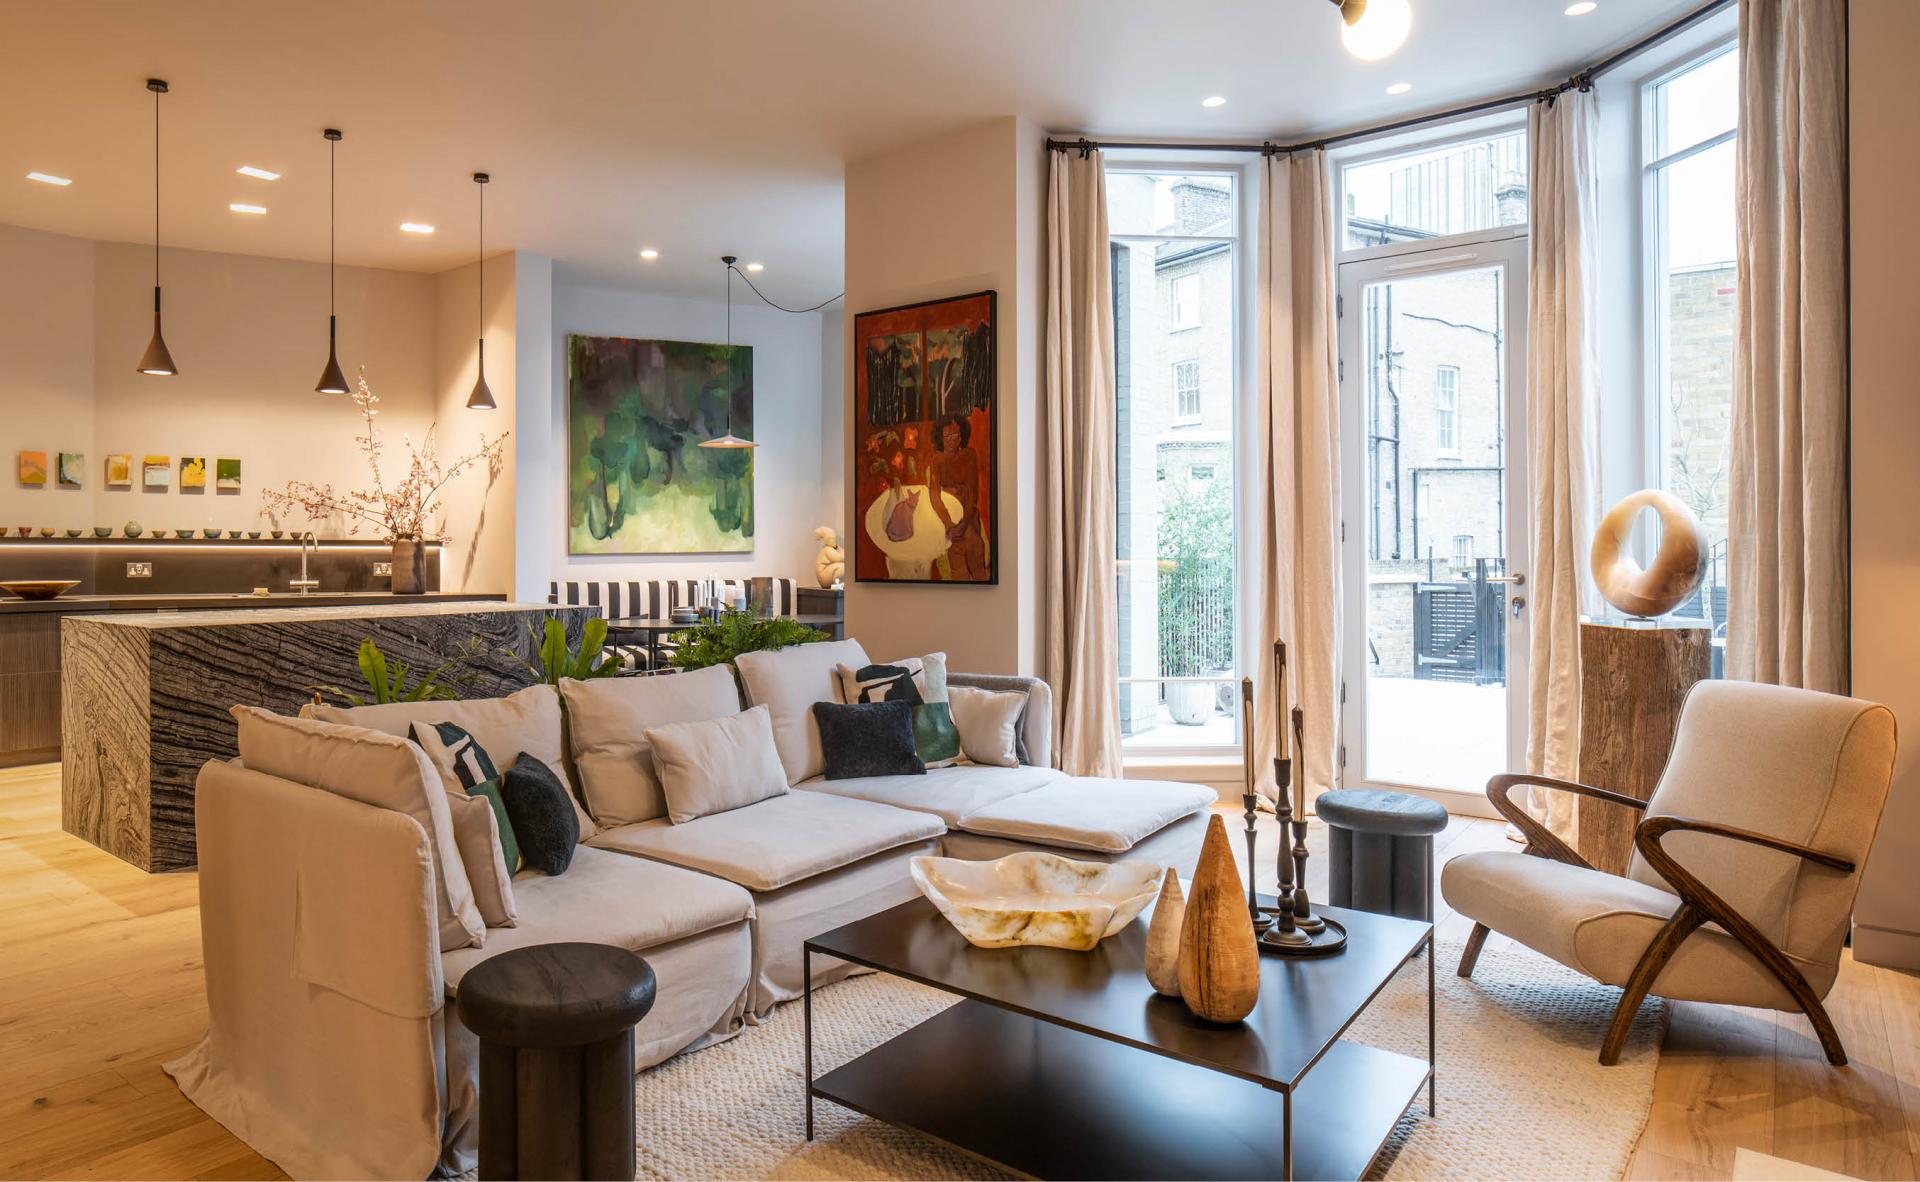 This Four-Bedroom Duplex in London Comes with £100,000+ Worth of Art Pieces